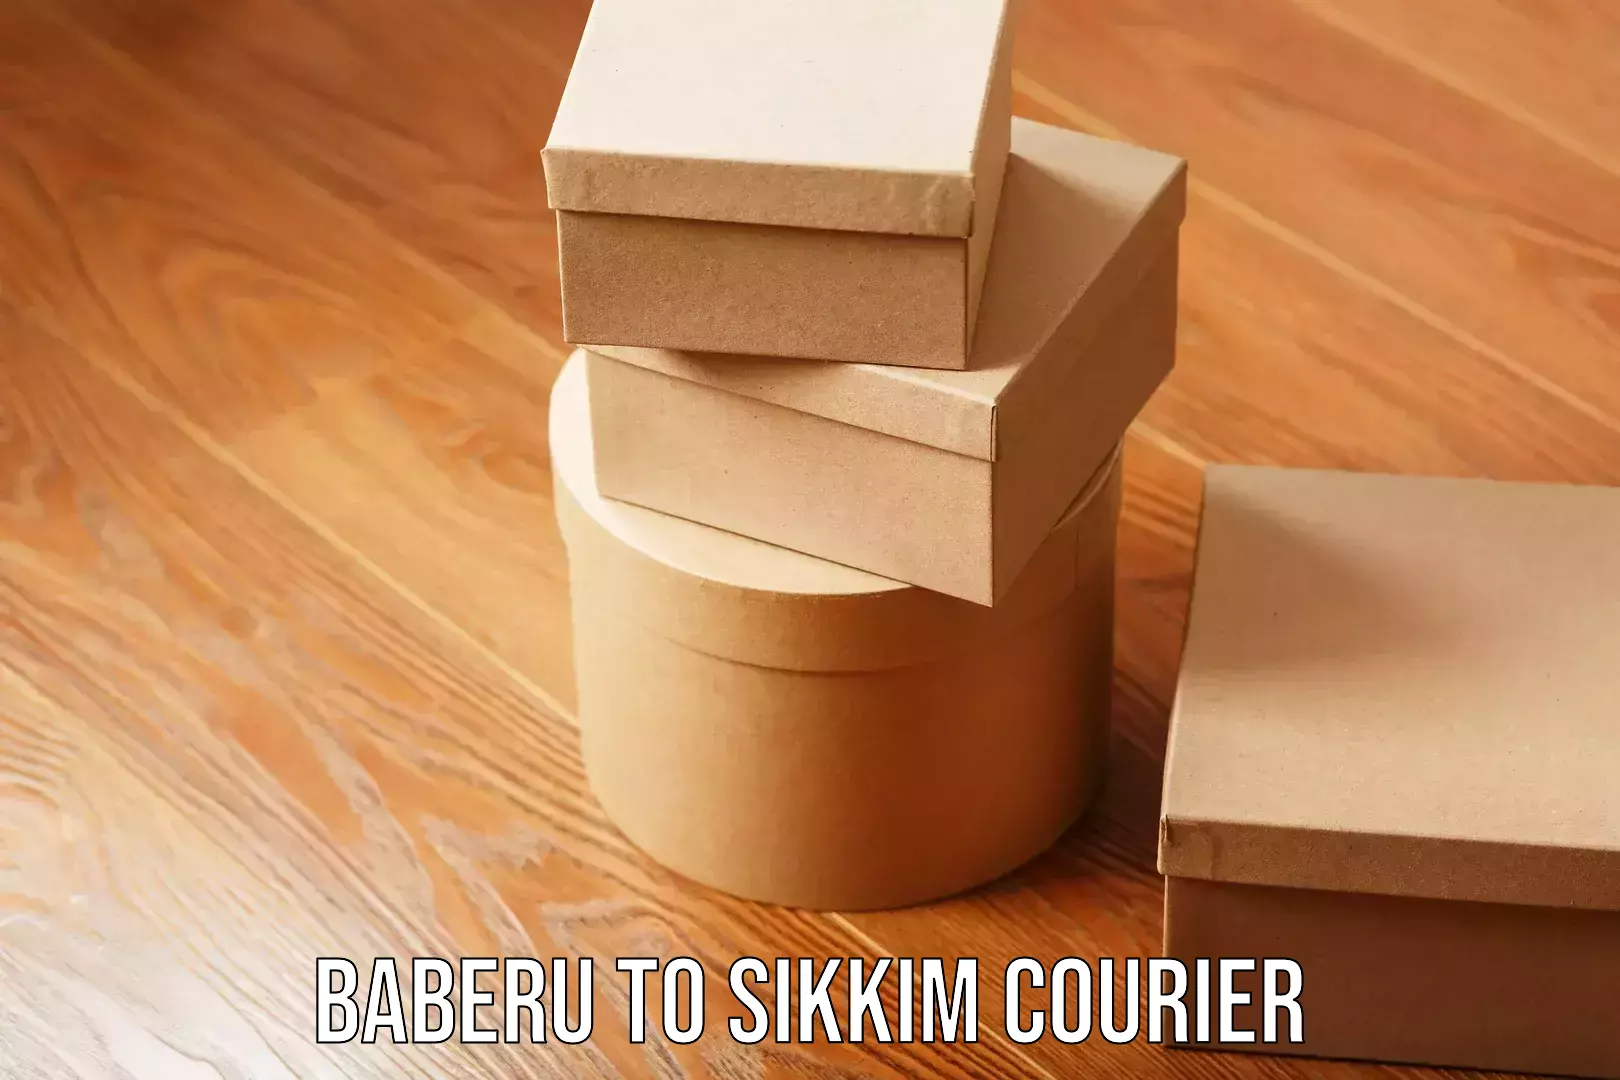 State-of-the-art courier technology Baberu to Sikkim